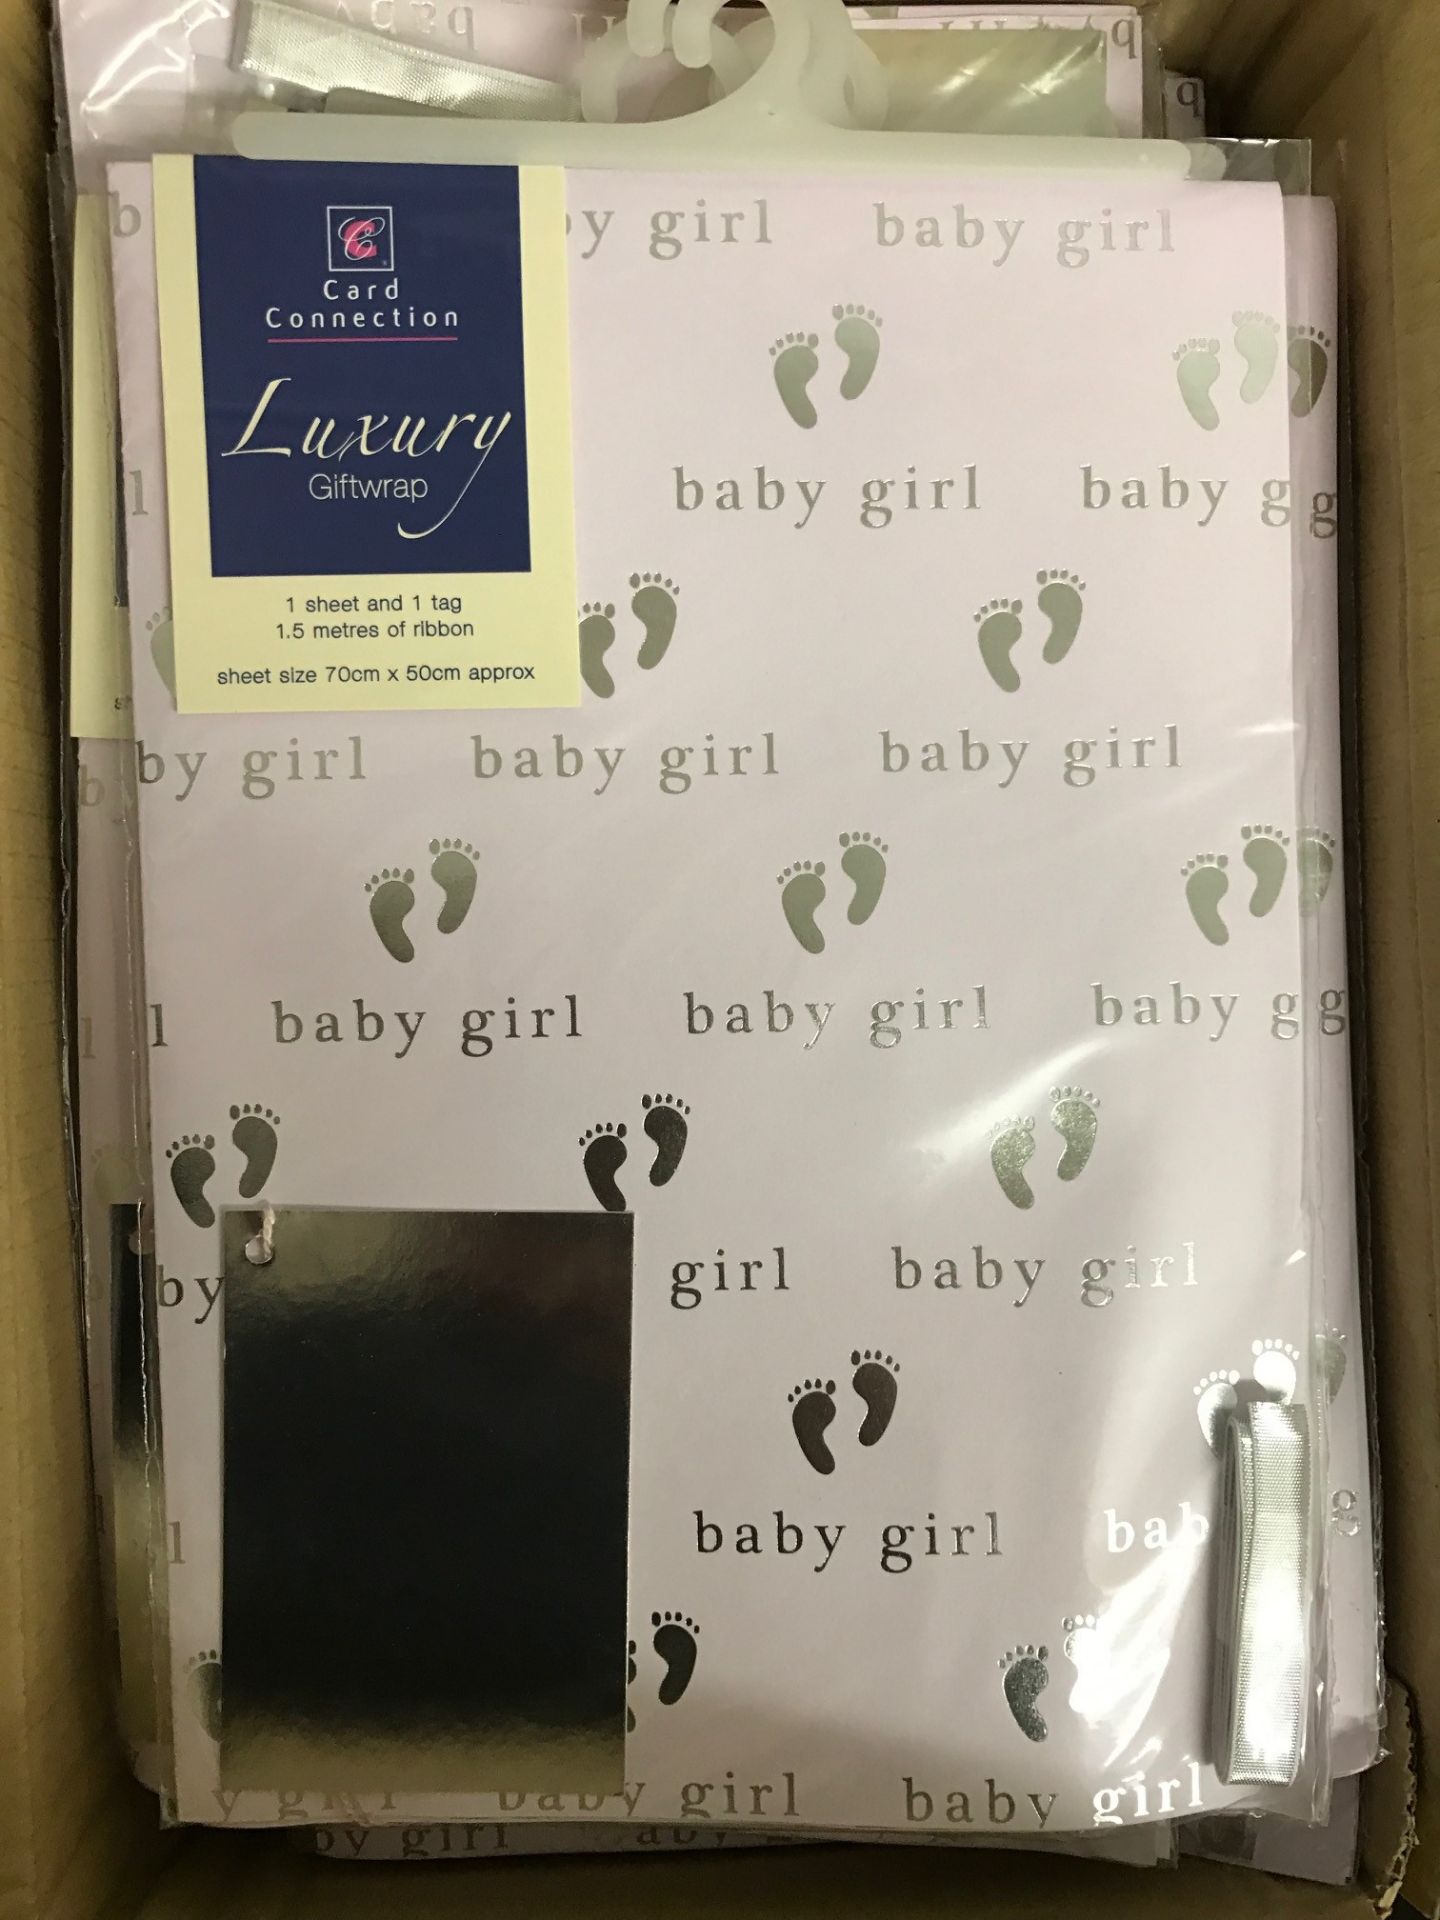 5 x Boxes of Card Collection Baby Girl Luxury Gift Wrap, 200 Individual Packs in Total - Massive